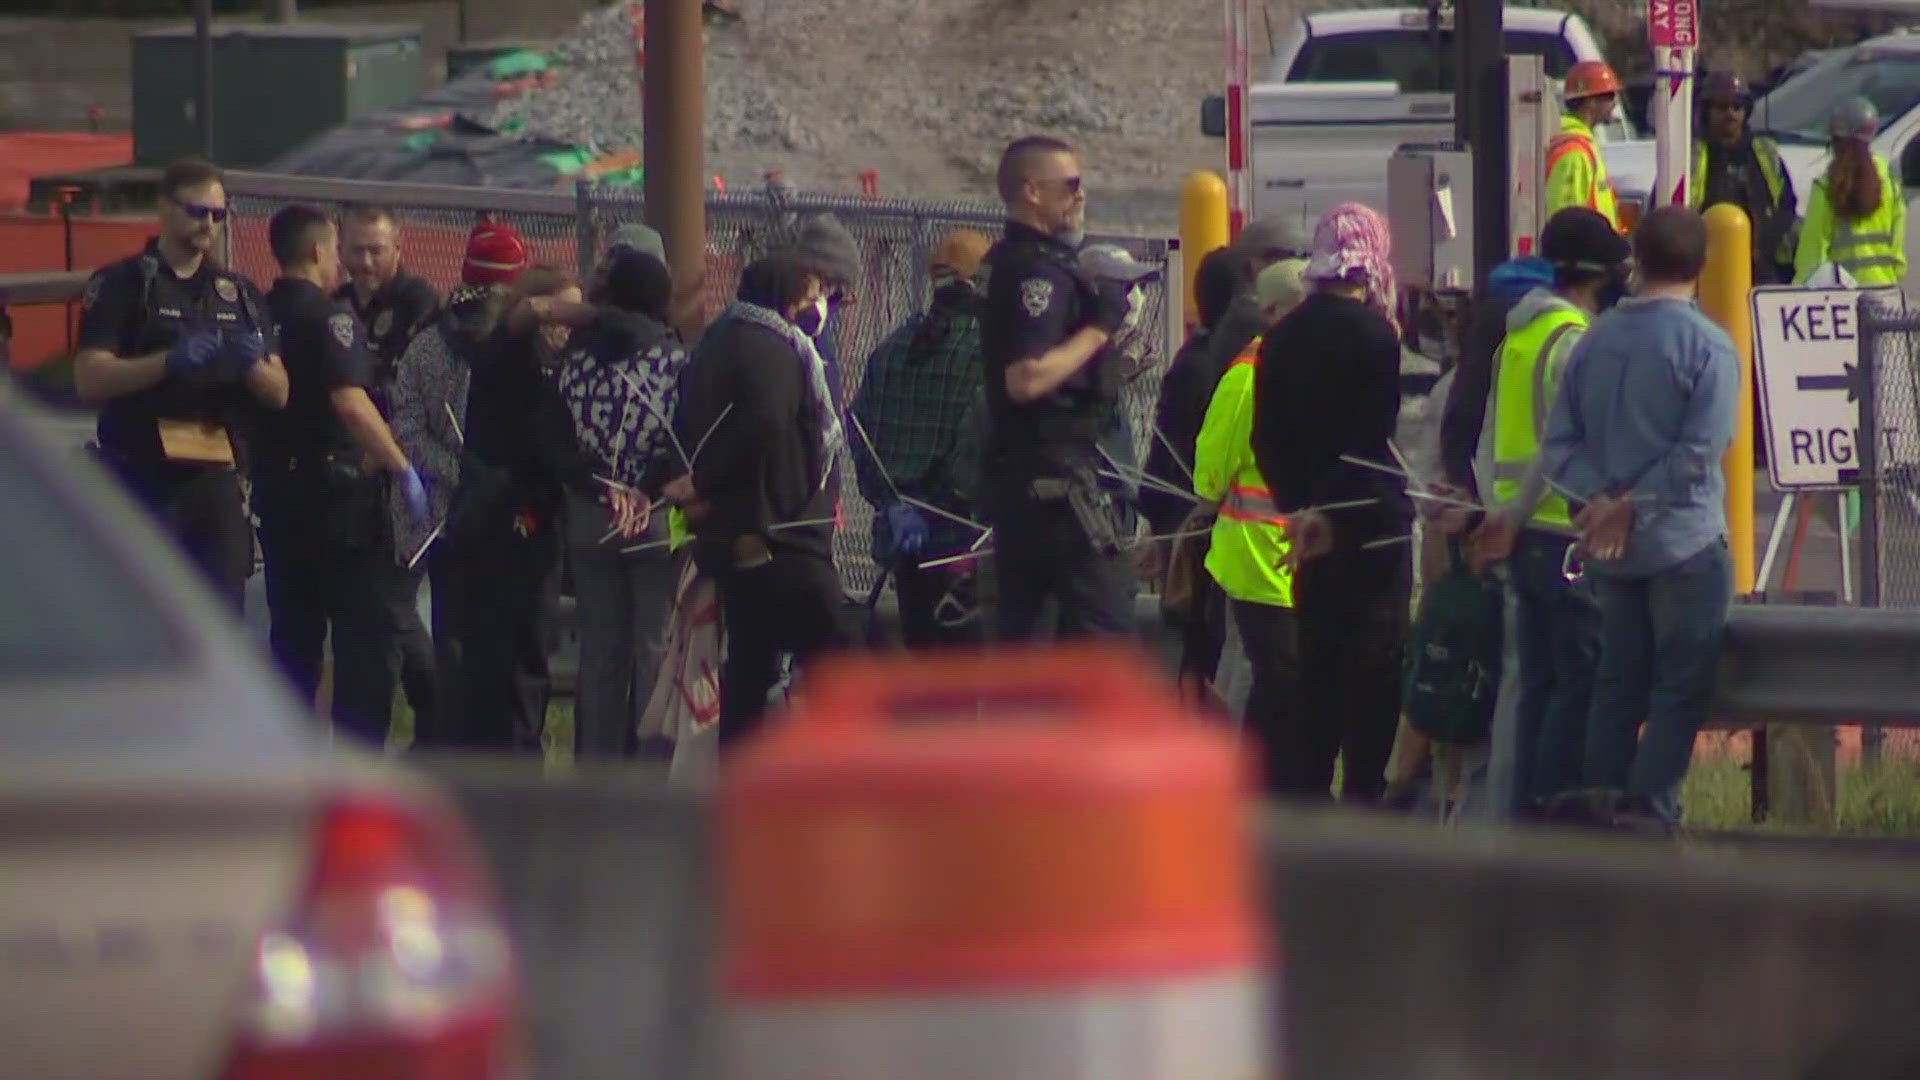 The City of SeaTac says most of the people face charges for failure to disperse and disorderly conduct.